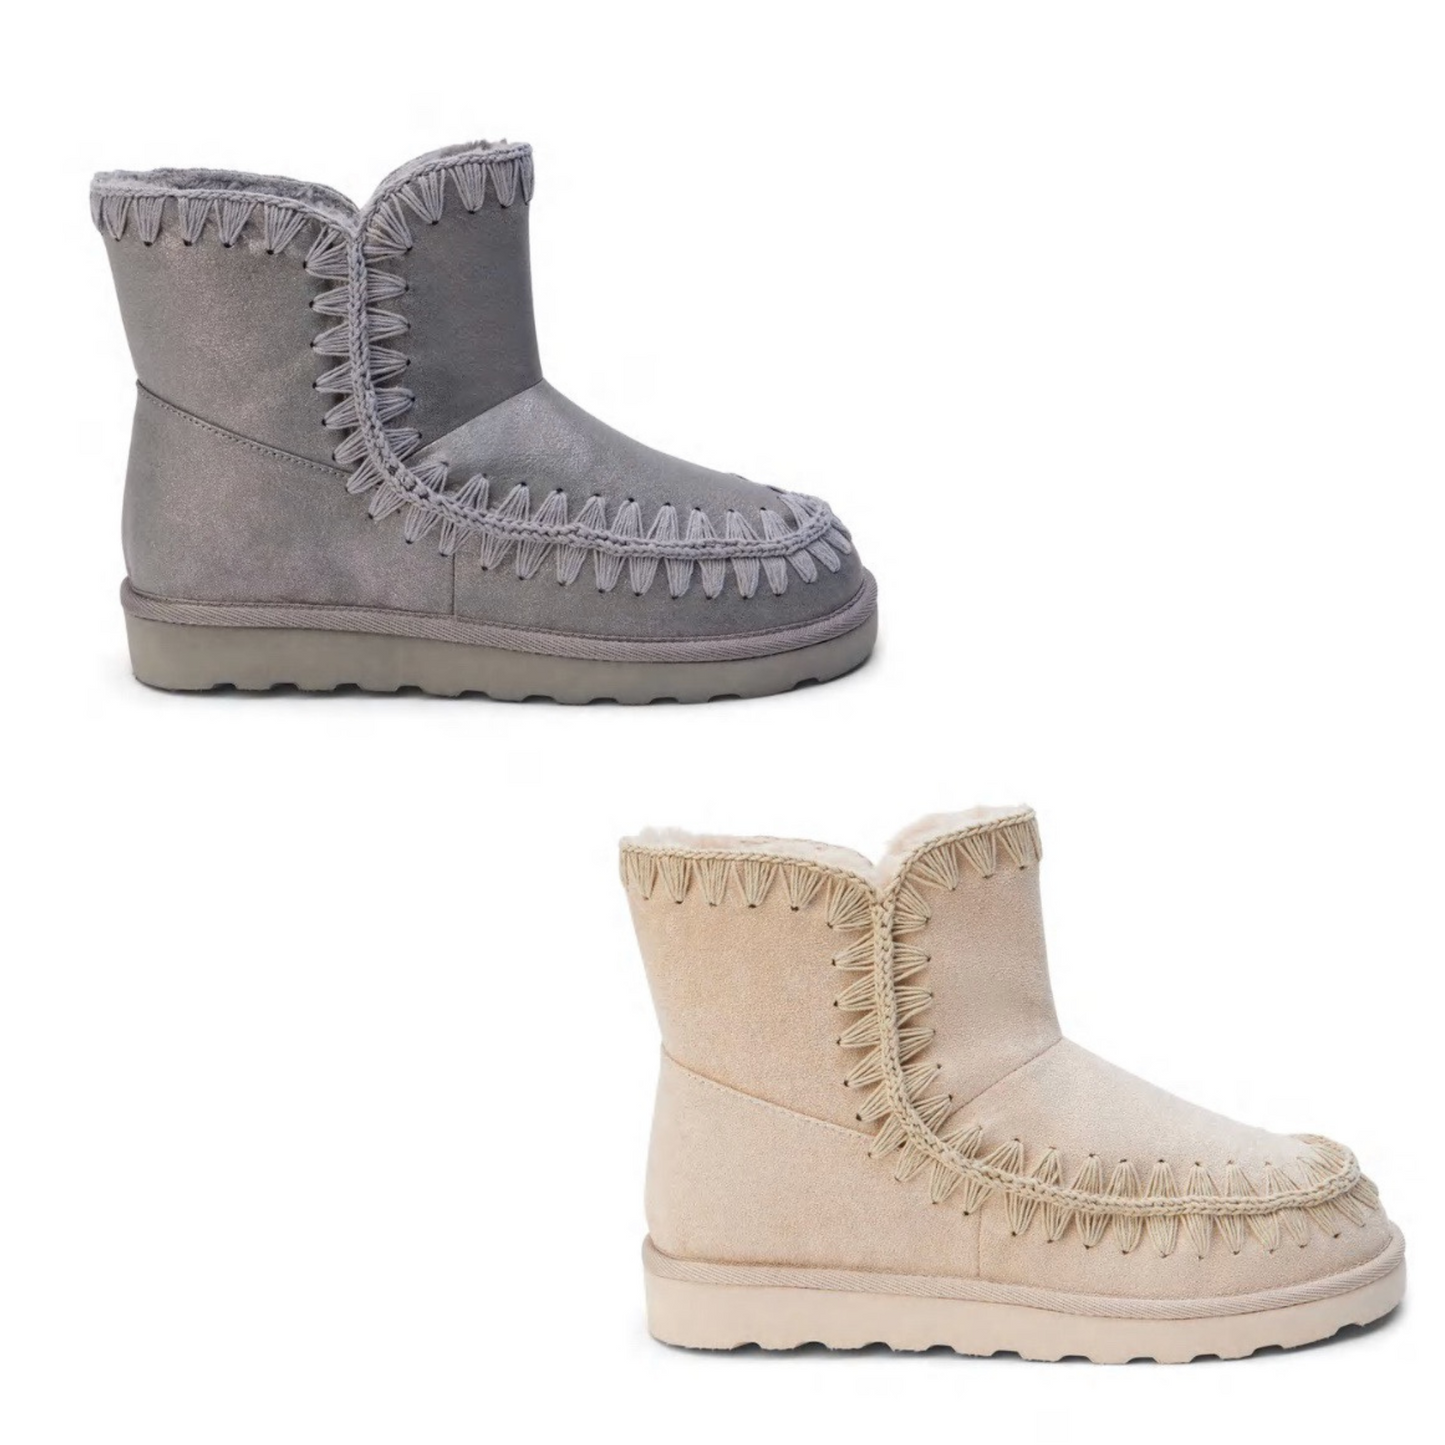 The Tahoe boot offers a stylish and comfortable wear with a fabric upper, pull-on style, and round toe. It has a vegan faux fur lined interior and padding insole for extra cushioning. Crafted with stitch detailing and a durable manmade outsole, this winter essential is designed to keep your feet warm. Available in Pewter and Vanilla color.